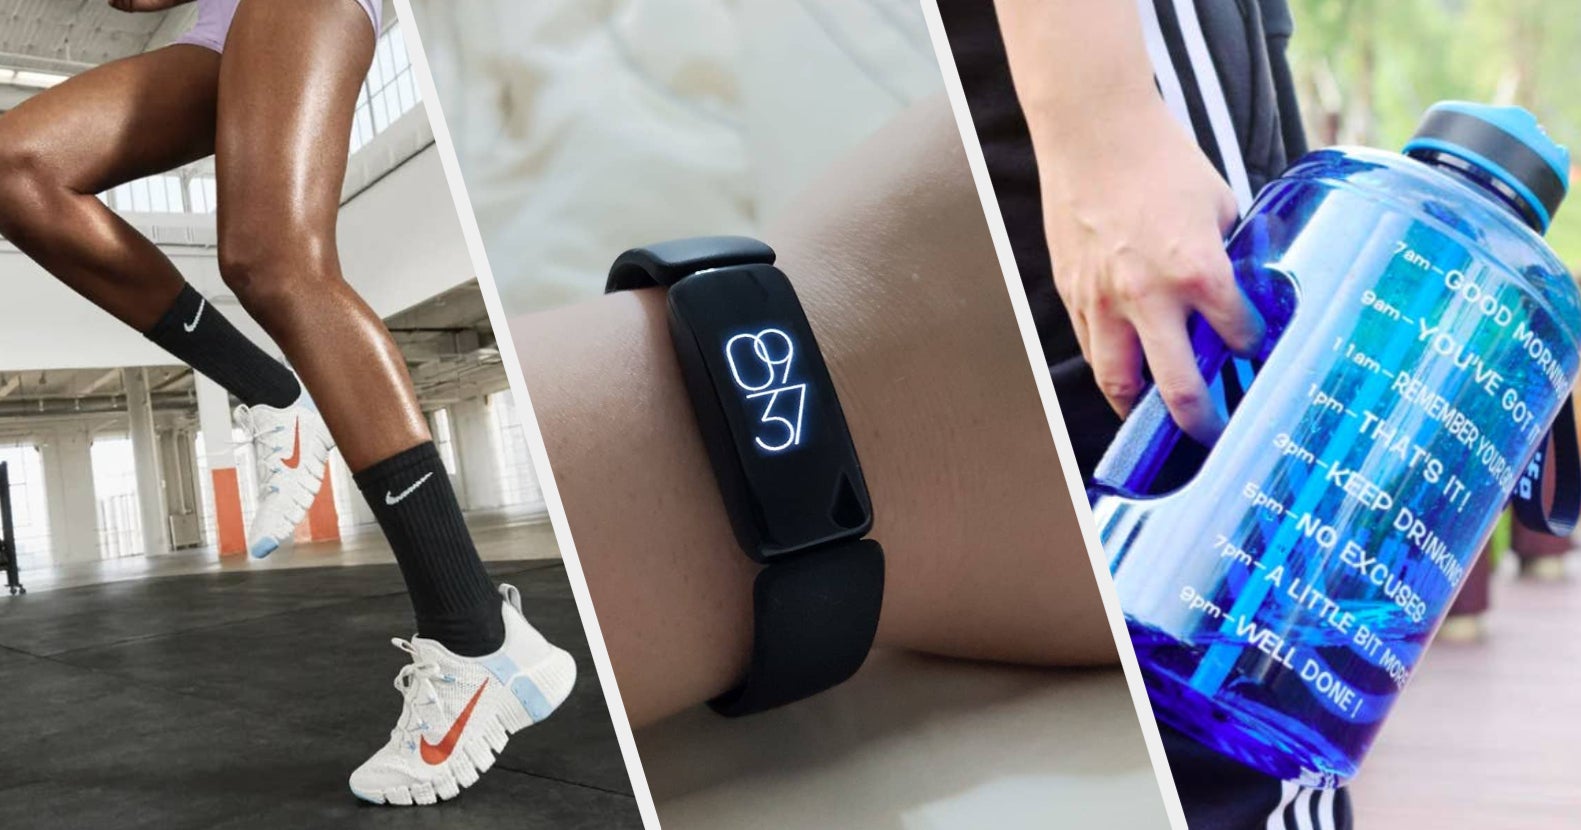 10 FITNESS GIFT IDEAS EVERY WORKOUT-JUNKIE WILL LOVE - Tel Aviv